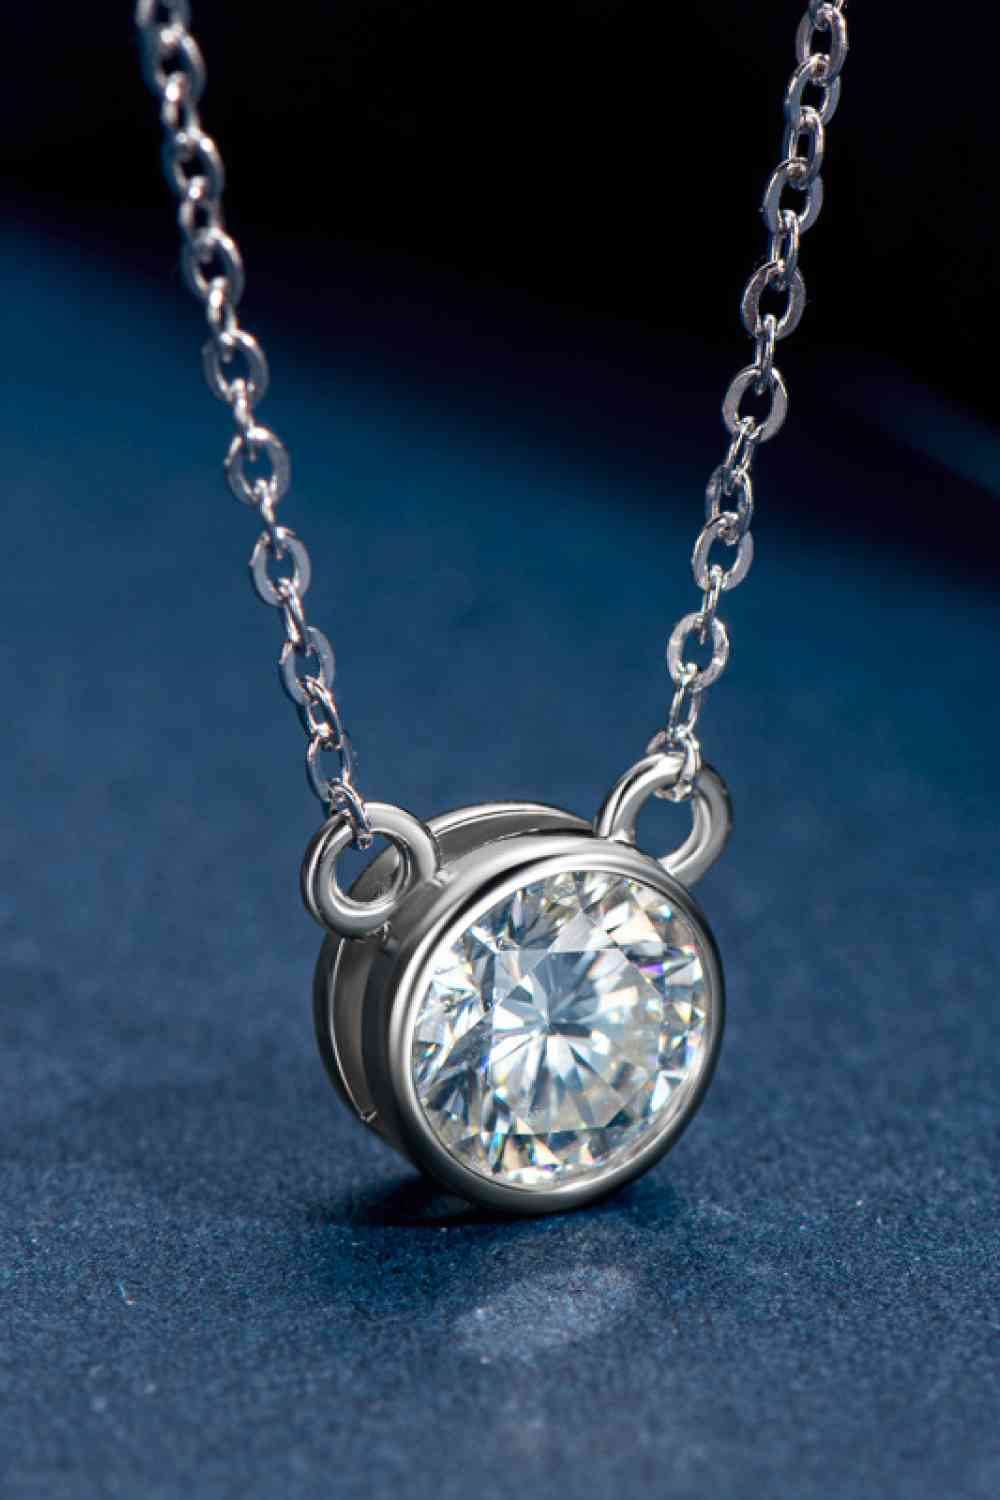 925 Sterling Silver 1 Carat Moissanite Round Pendant Necklace - lolaluxeshop